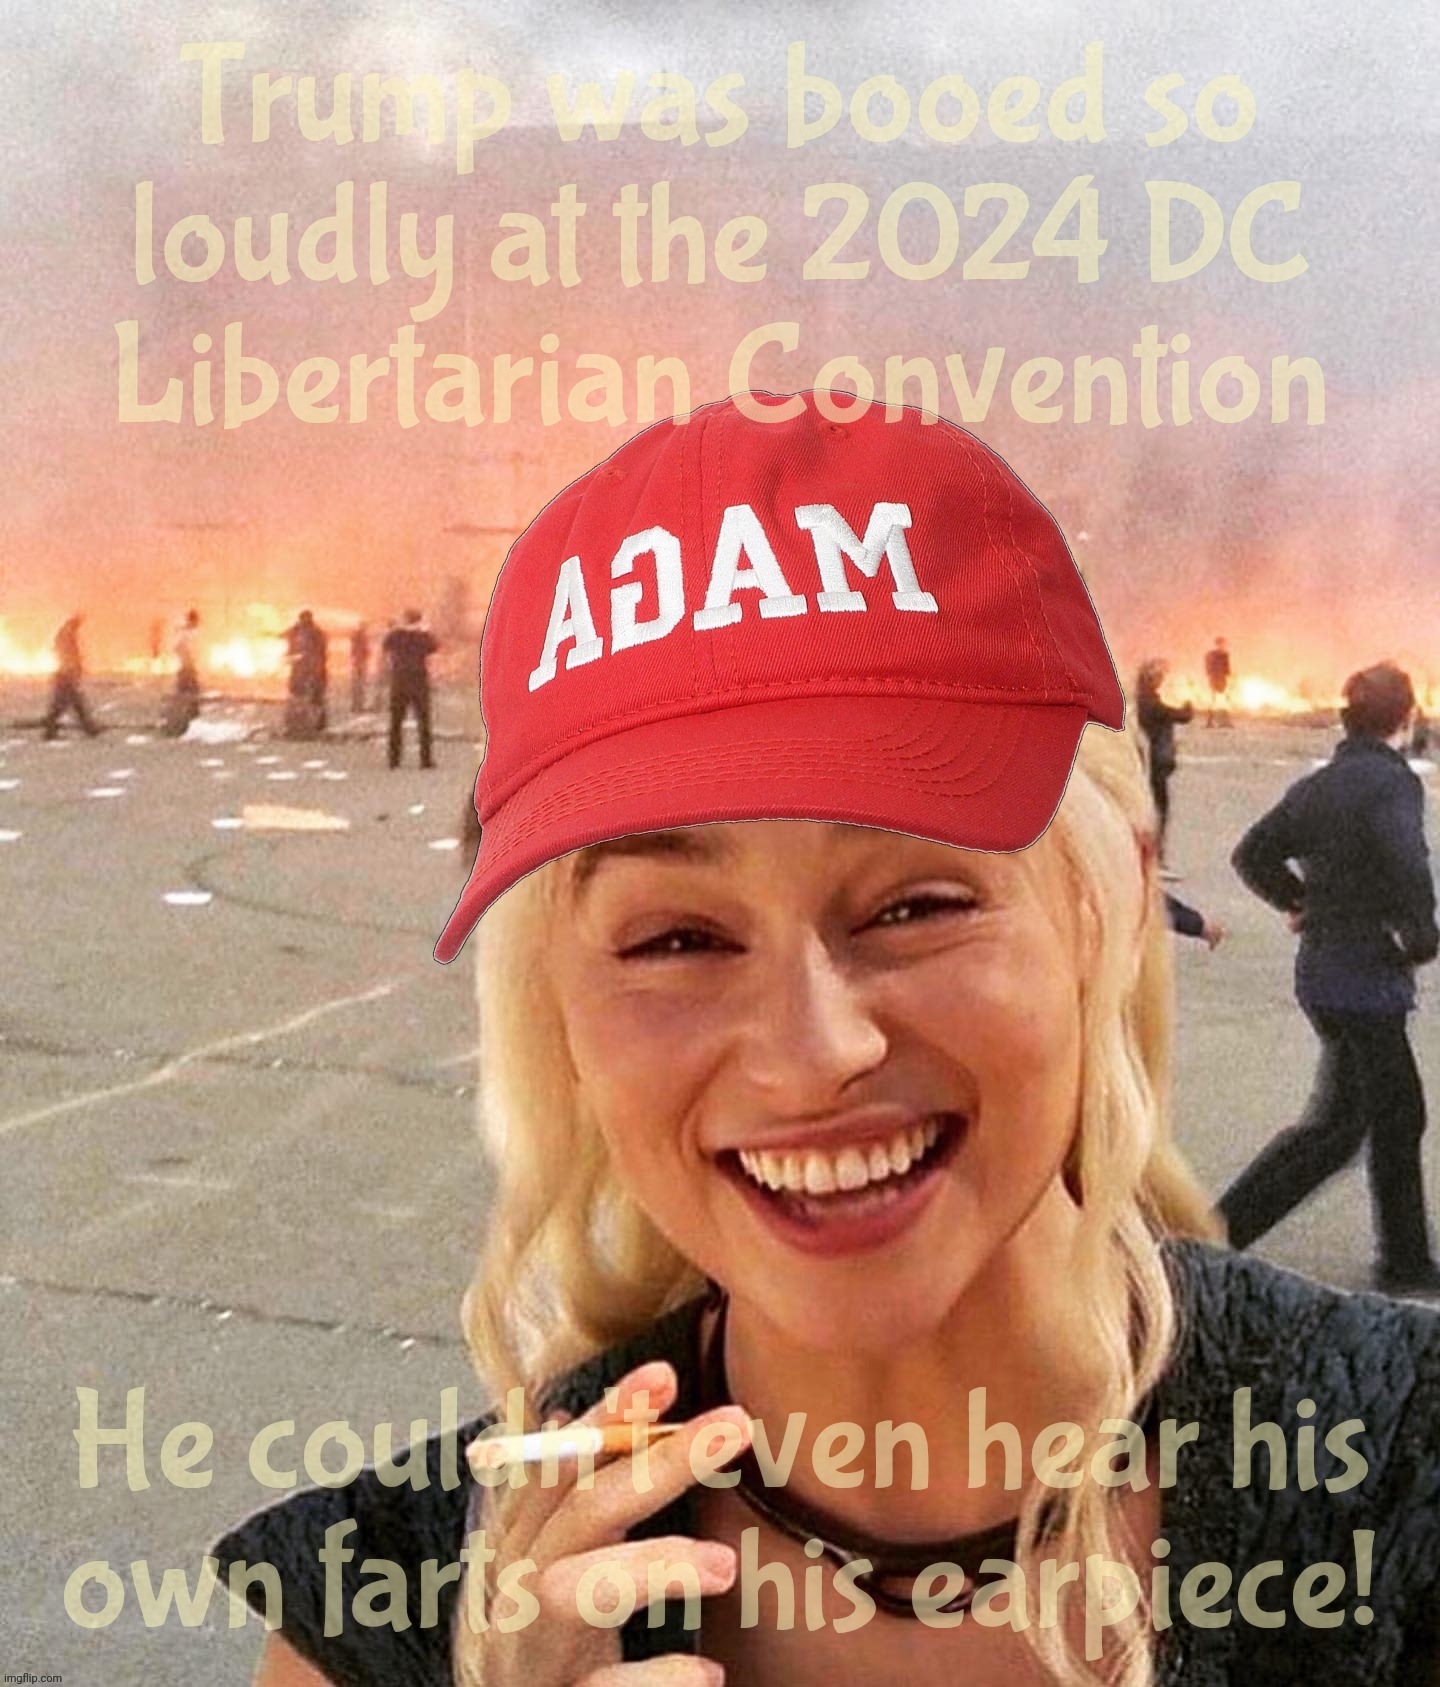 Trump booed at the 2024 DC Libertarian Convention while begging for their nomination | Trump was booed so loudly at the 2024 DC
Libertarian Convention; He couldn't even hear his
own farts on his earpiece! | image tagged in disaster smoker girl,disaster smoker girl not quite maga,trump booed at libertarian convention,oops,trump,donald trump | made w/ Imgflip meme maker